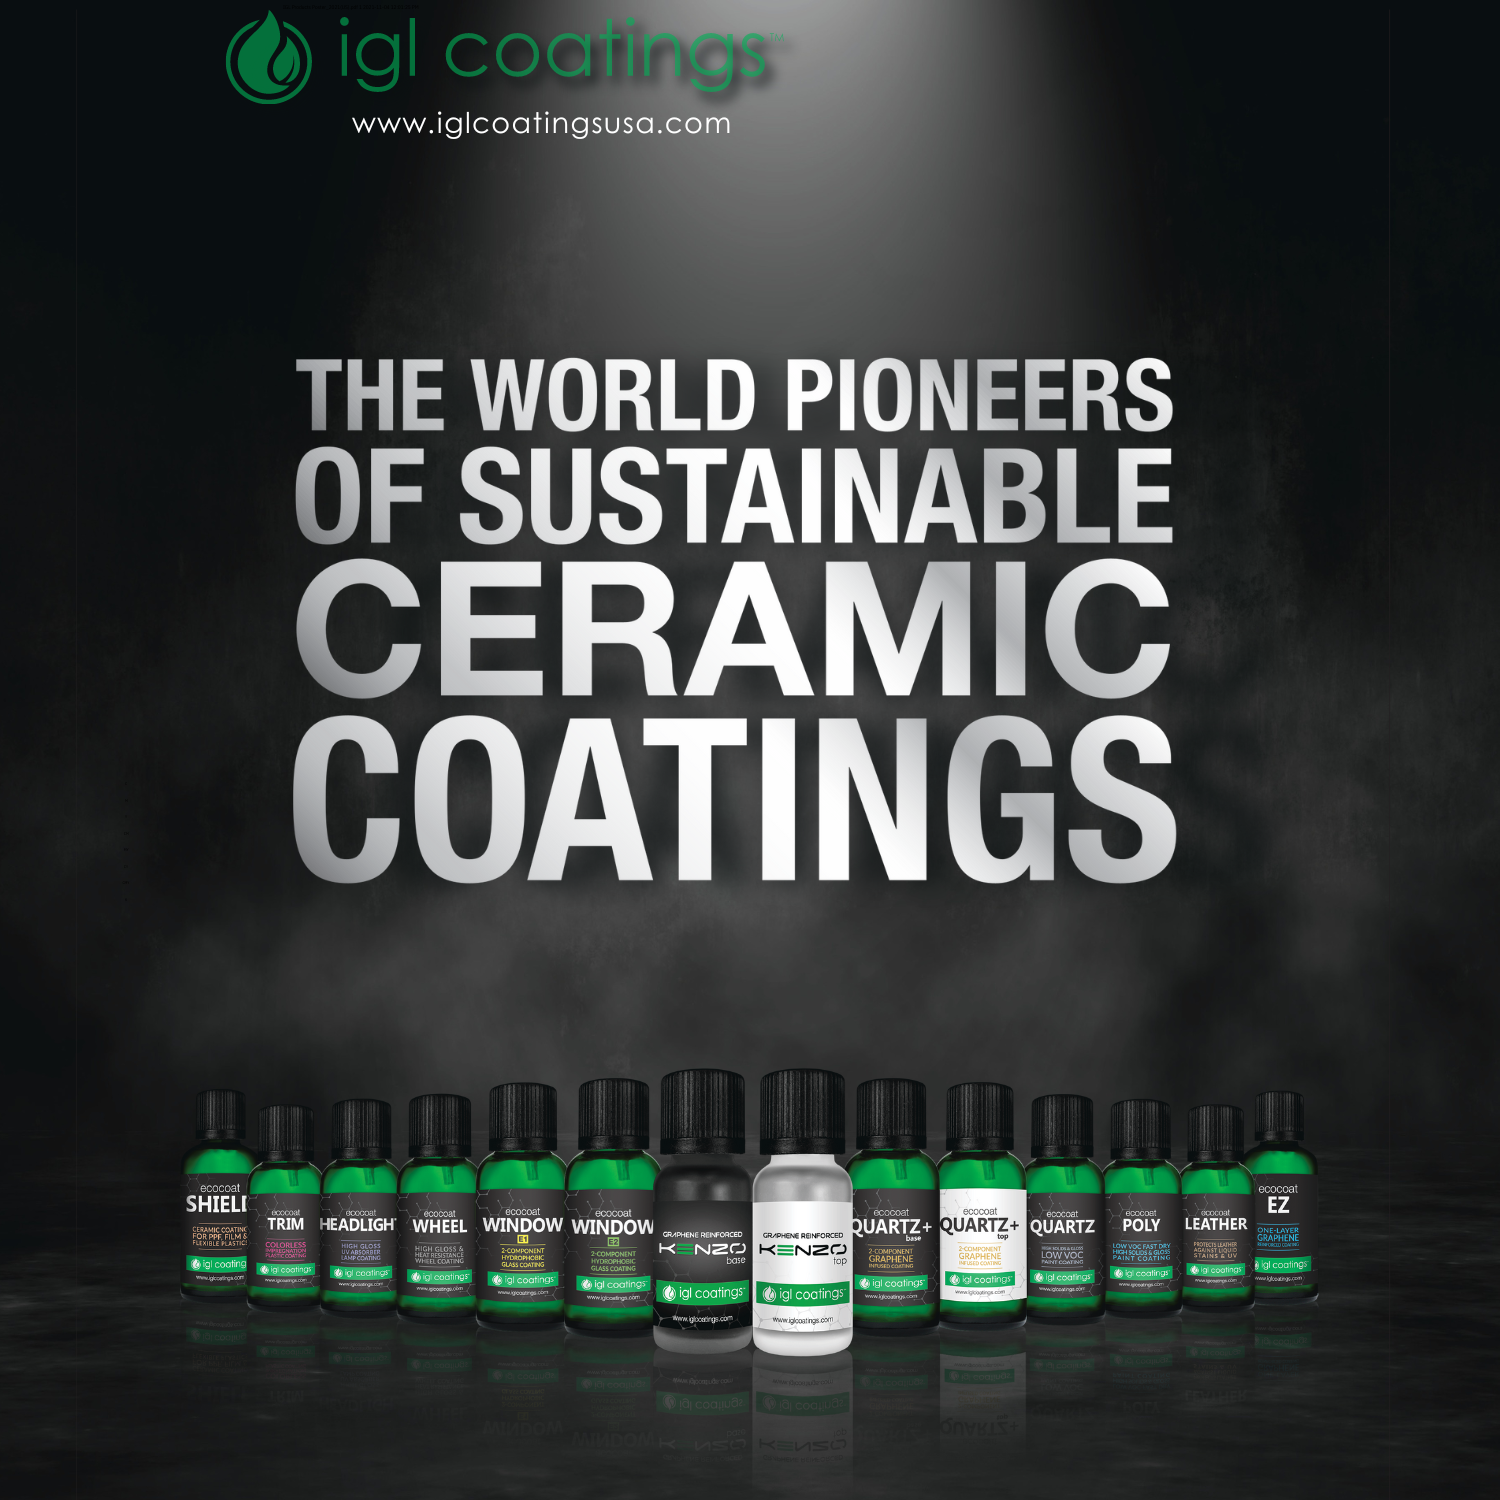 Changing The World by Partnering With IGL Coatings